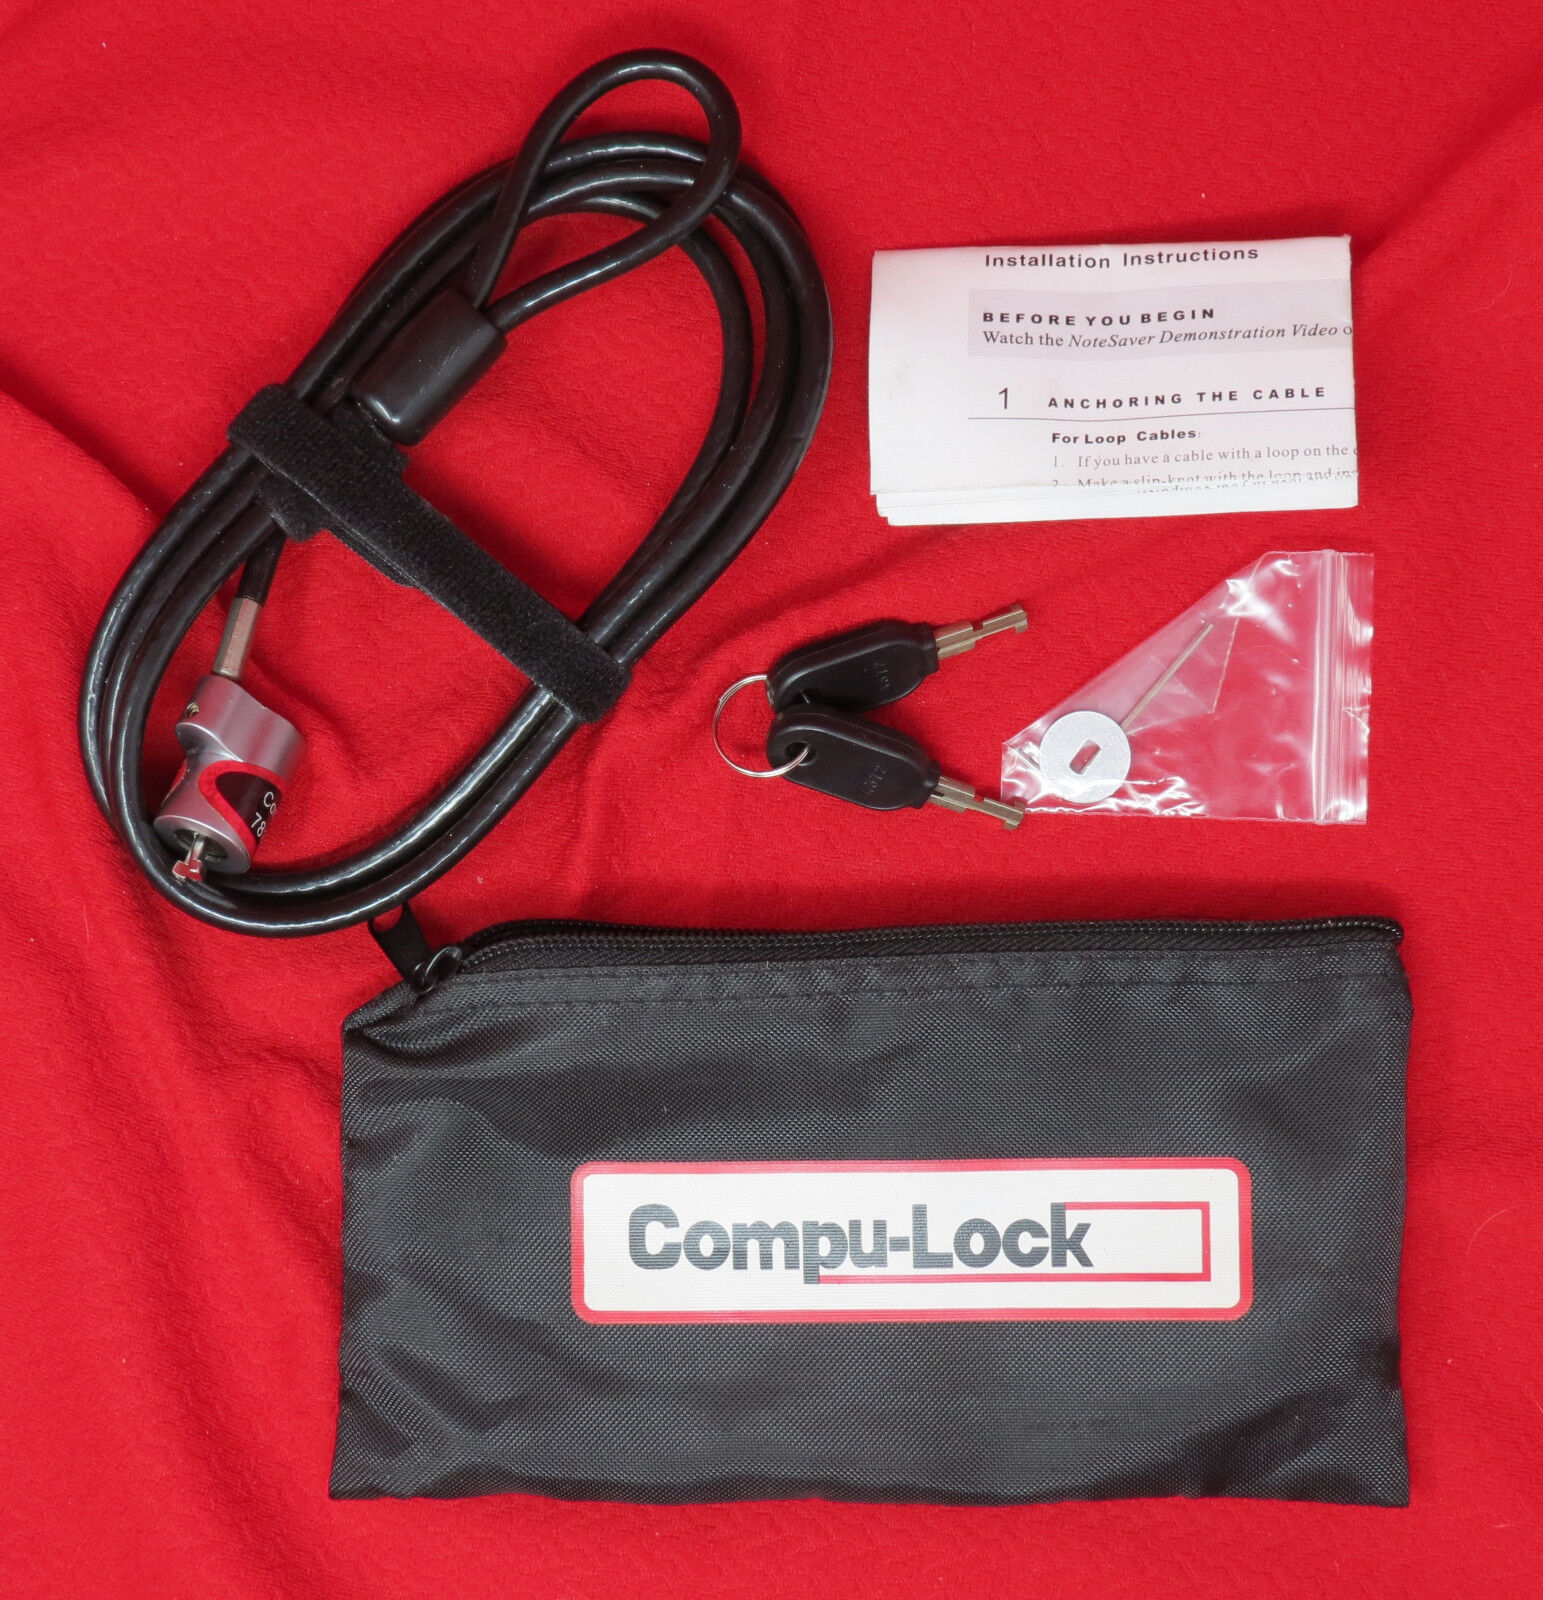 NEW NoteSaver Laptop Computer Anti Theft ULTRA Security Cable Lock 2 Keys NEW